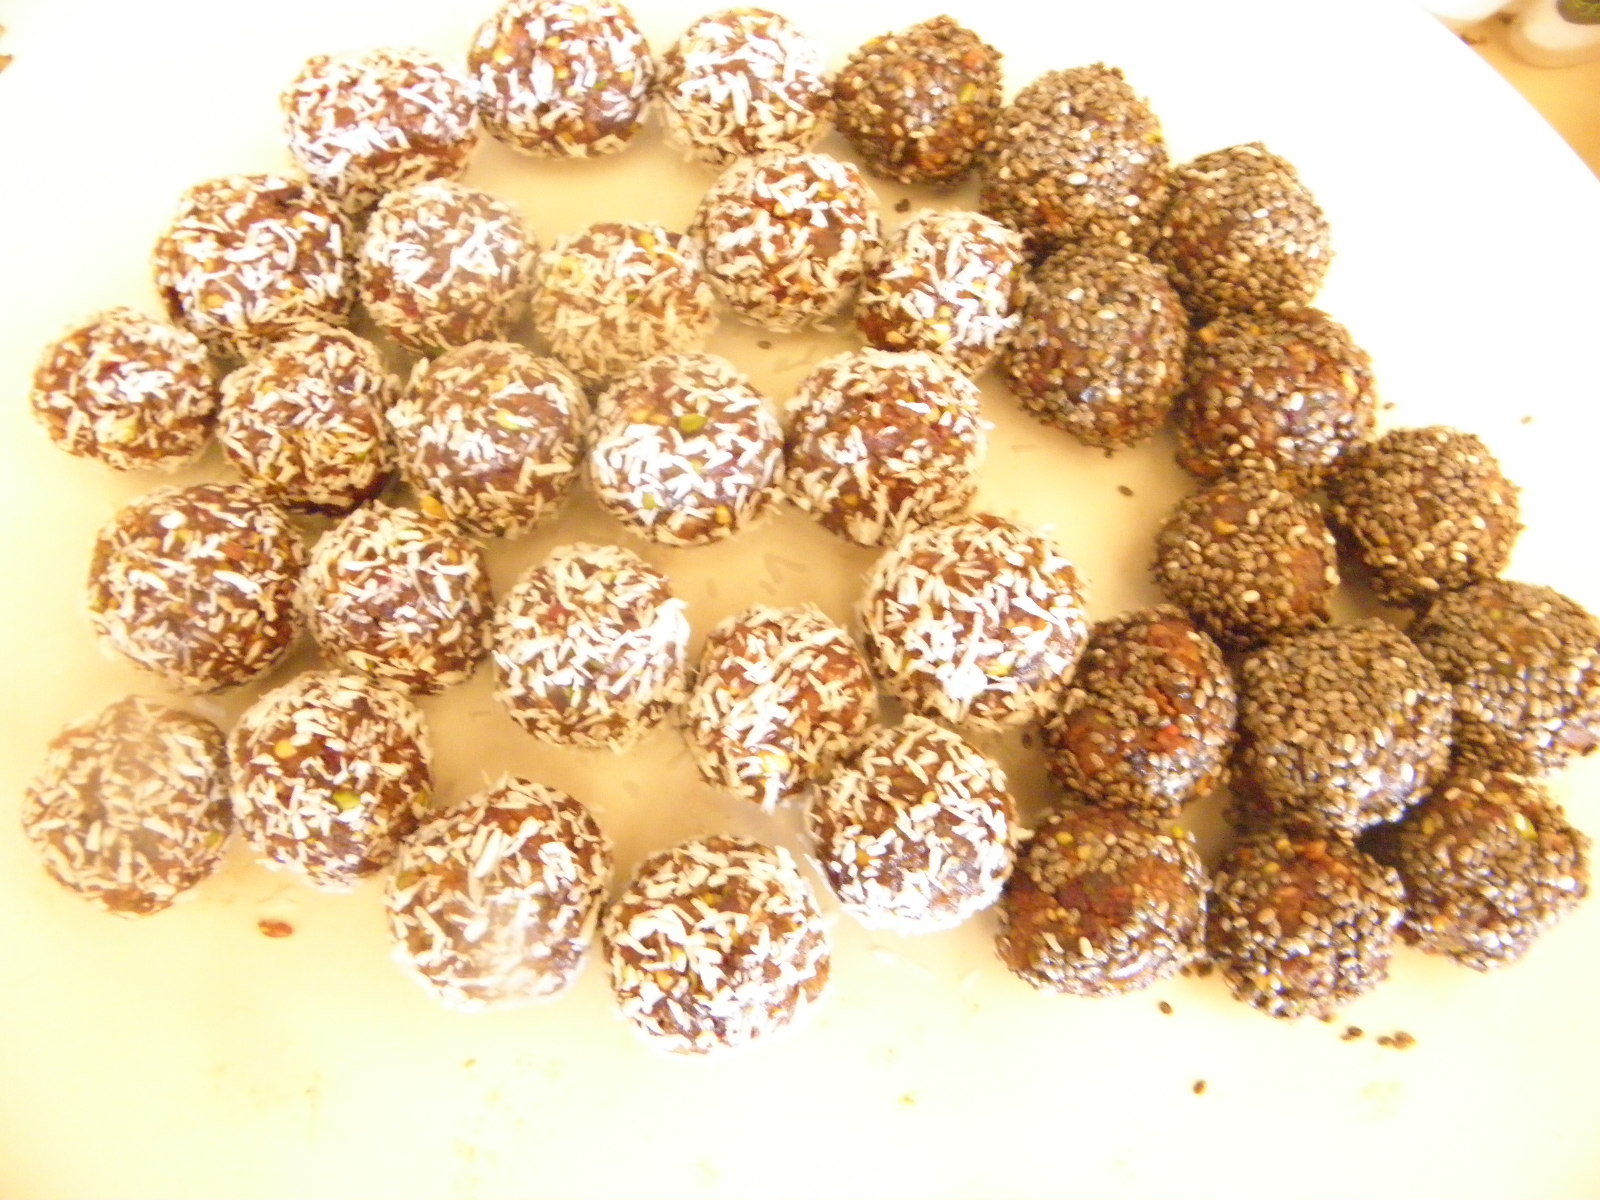 chocolate and pistachio fruit balls for Christmas food gifts